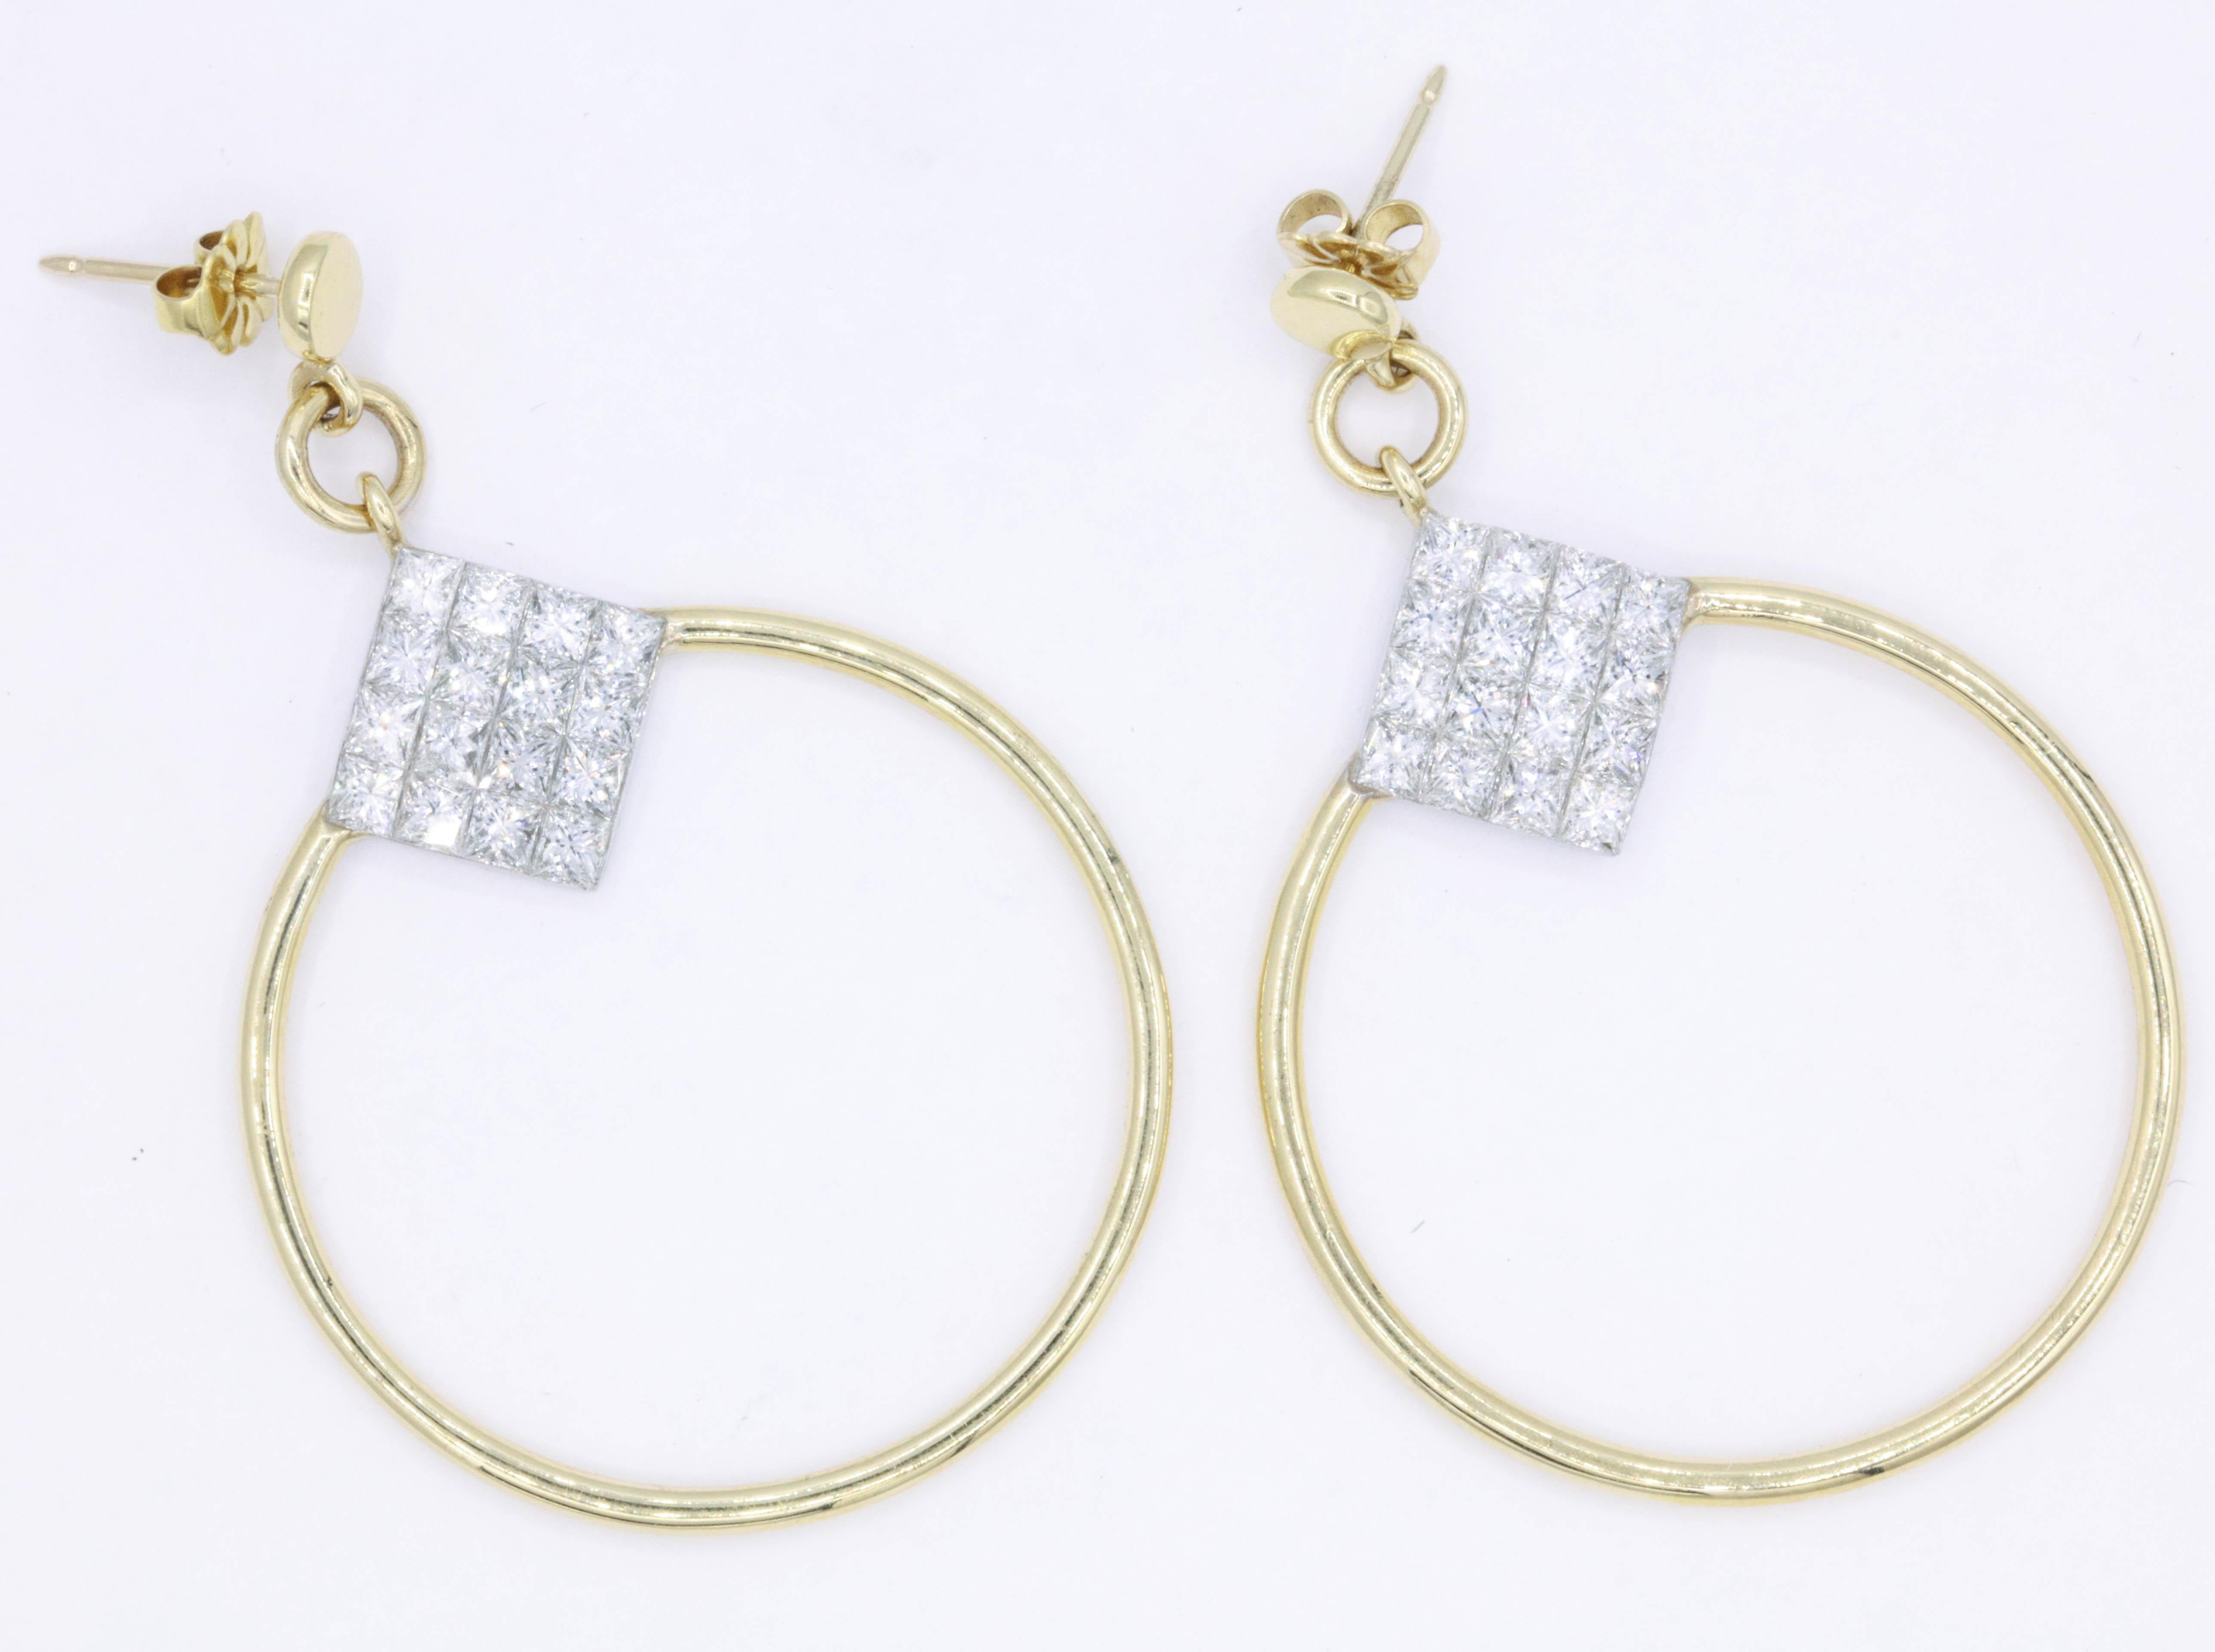 These 18K yellow gold hoop earrings feature 32 princess cut diamonds weighing 4 carats. Greats great on the ear!!
Color: G-H
Clarity: SI